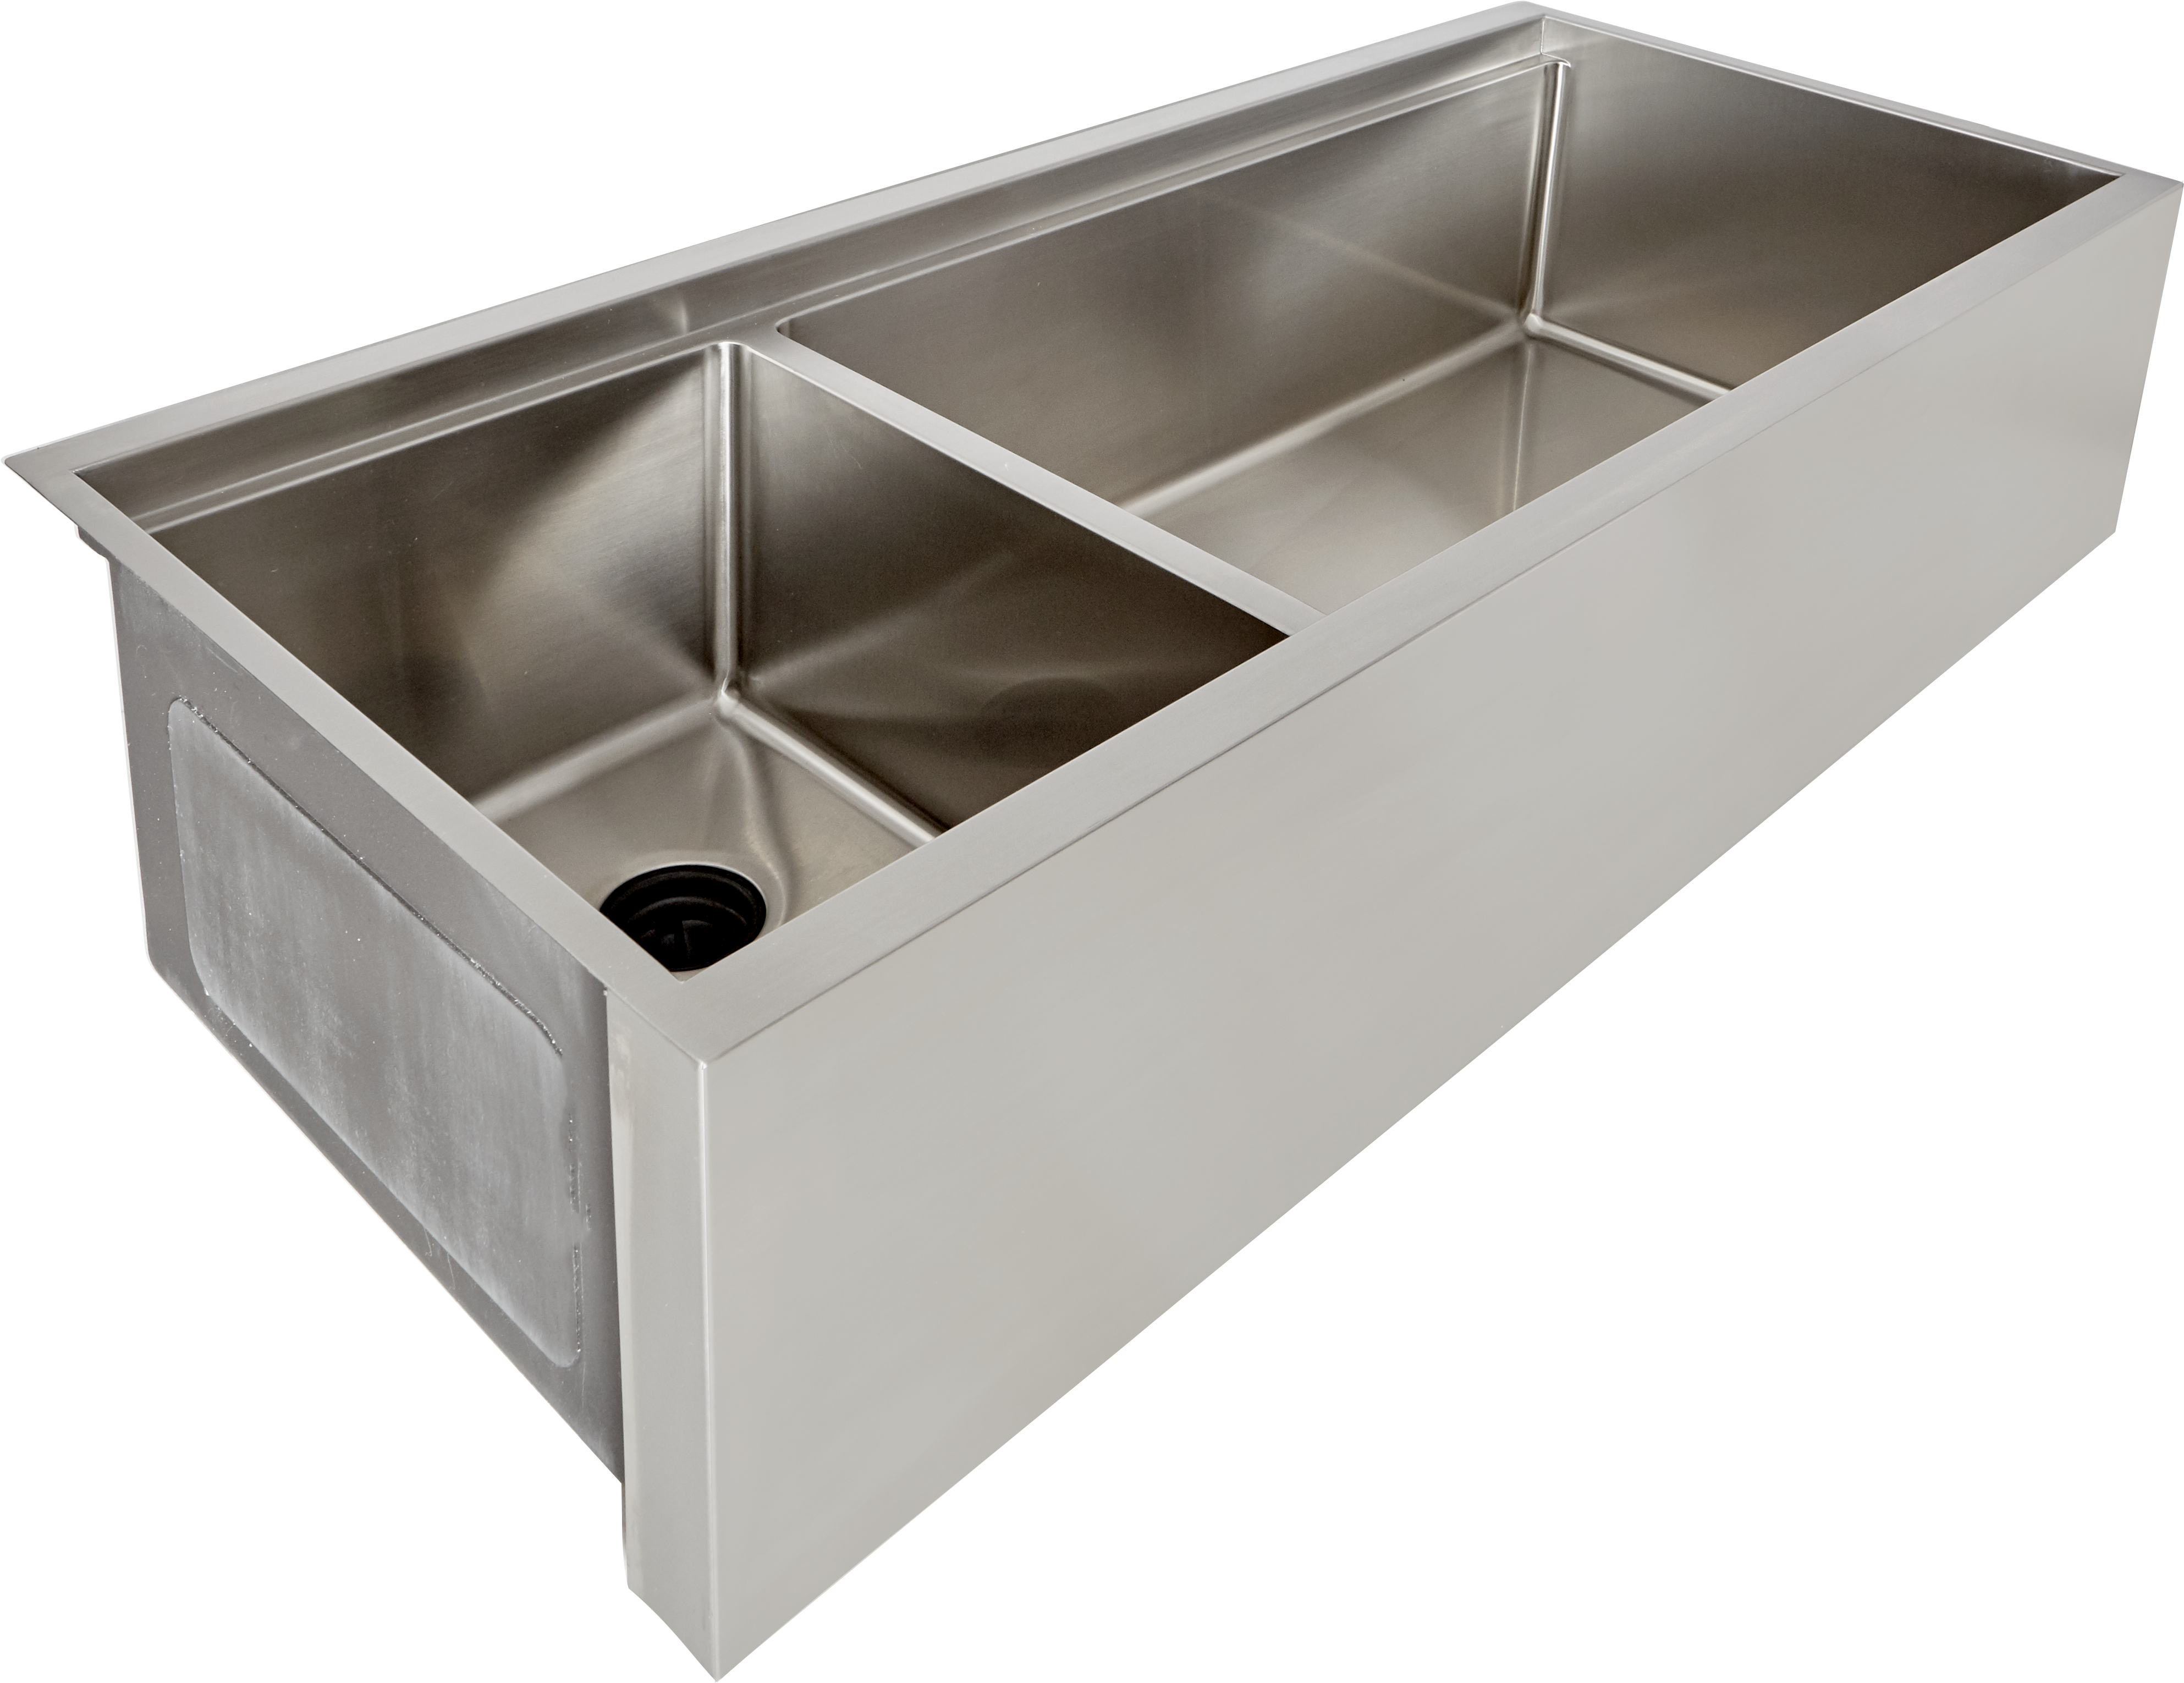 A Stainless Steel Sink With Two Compartments